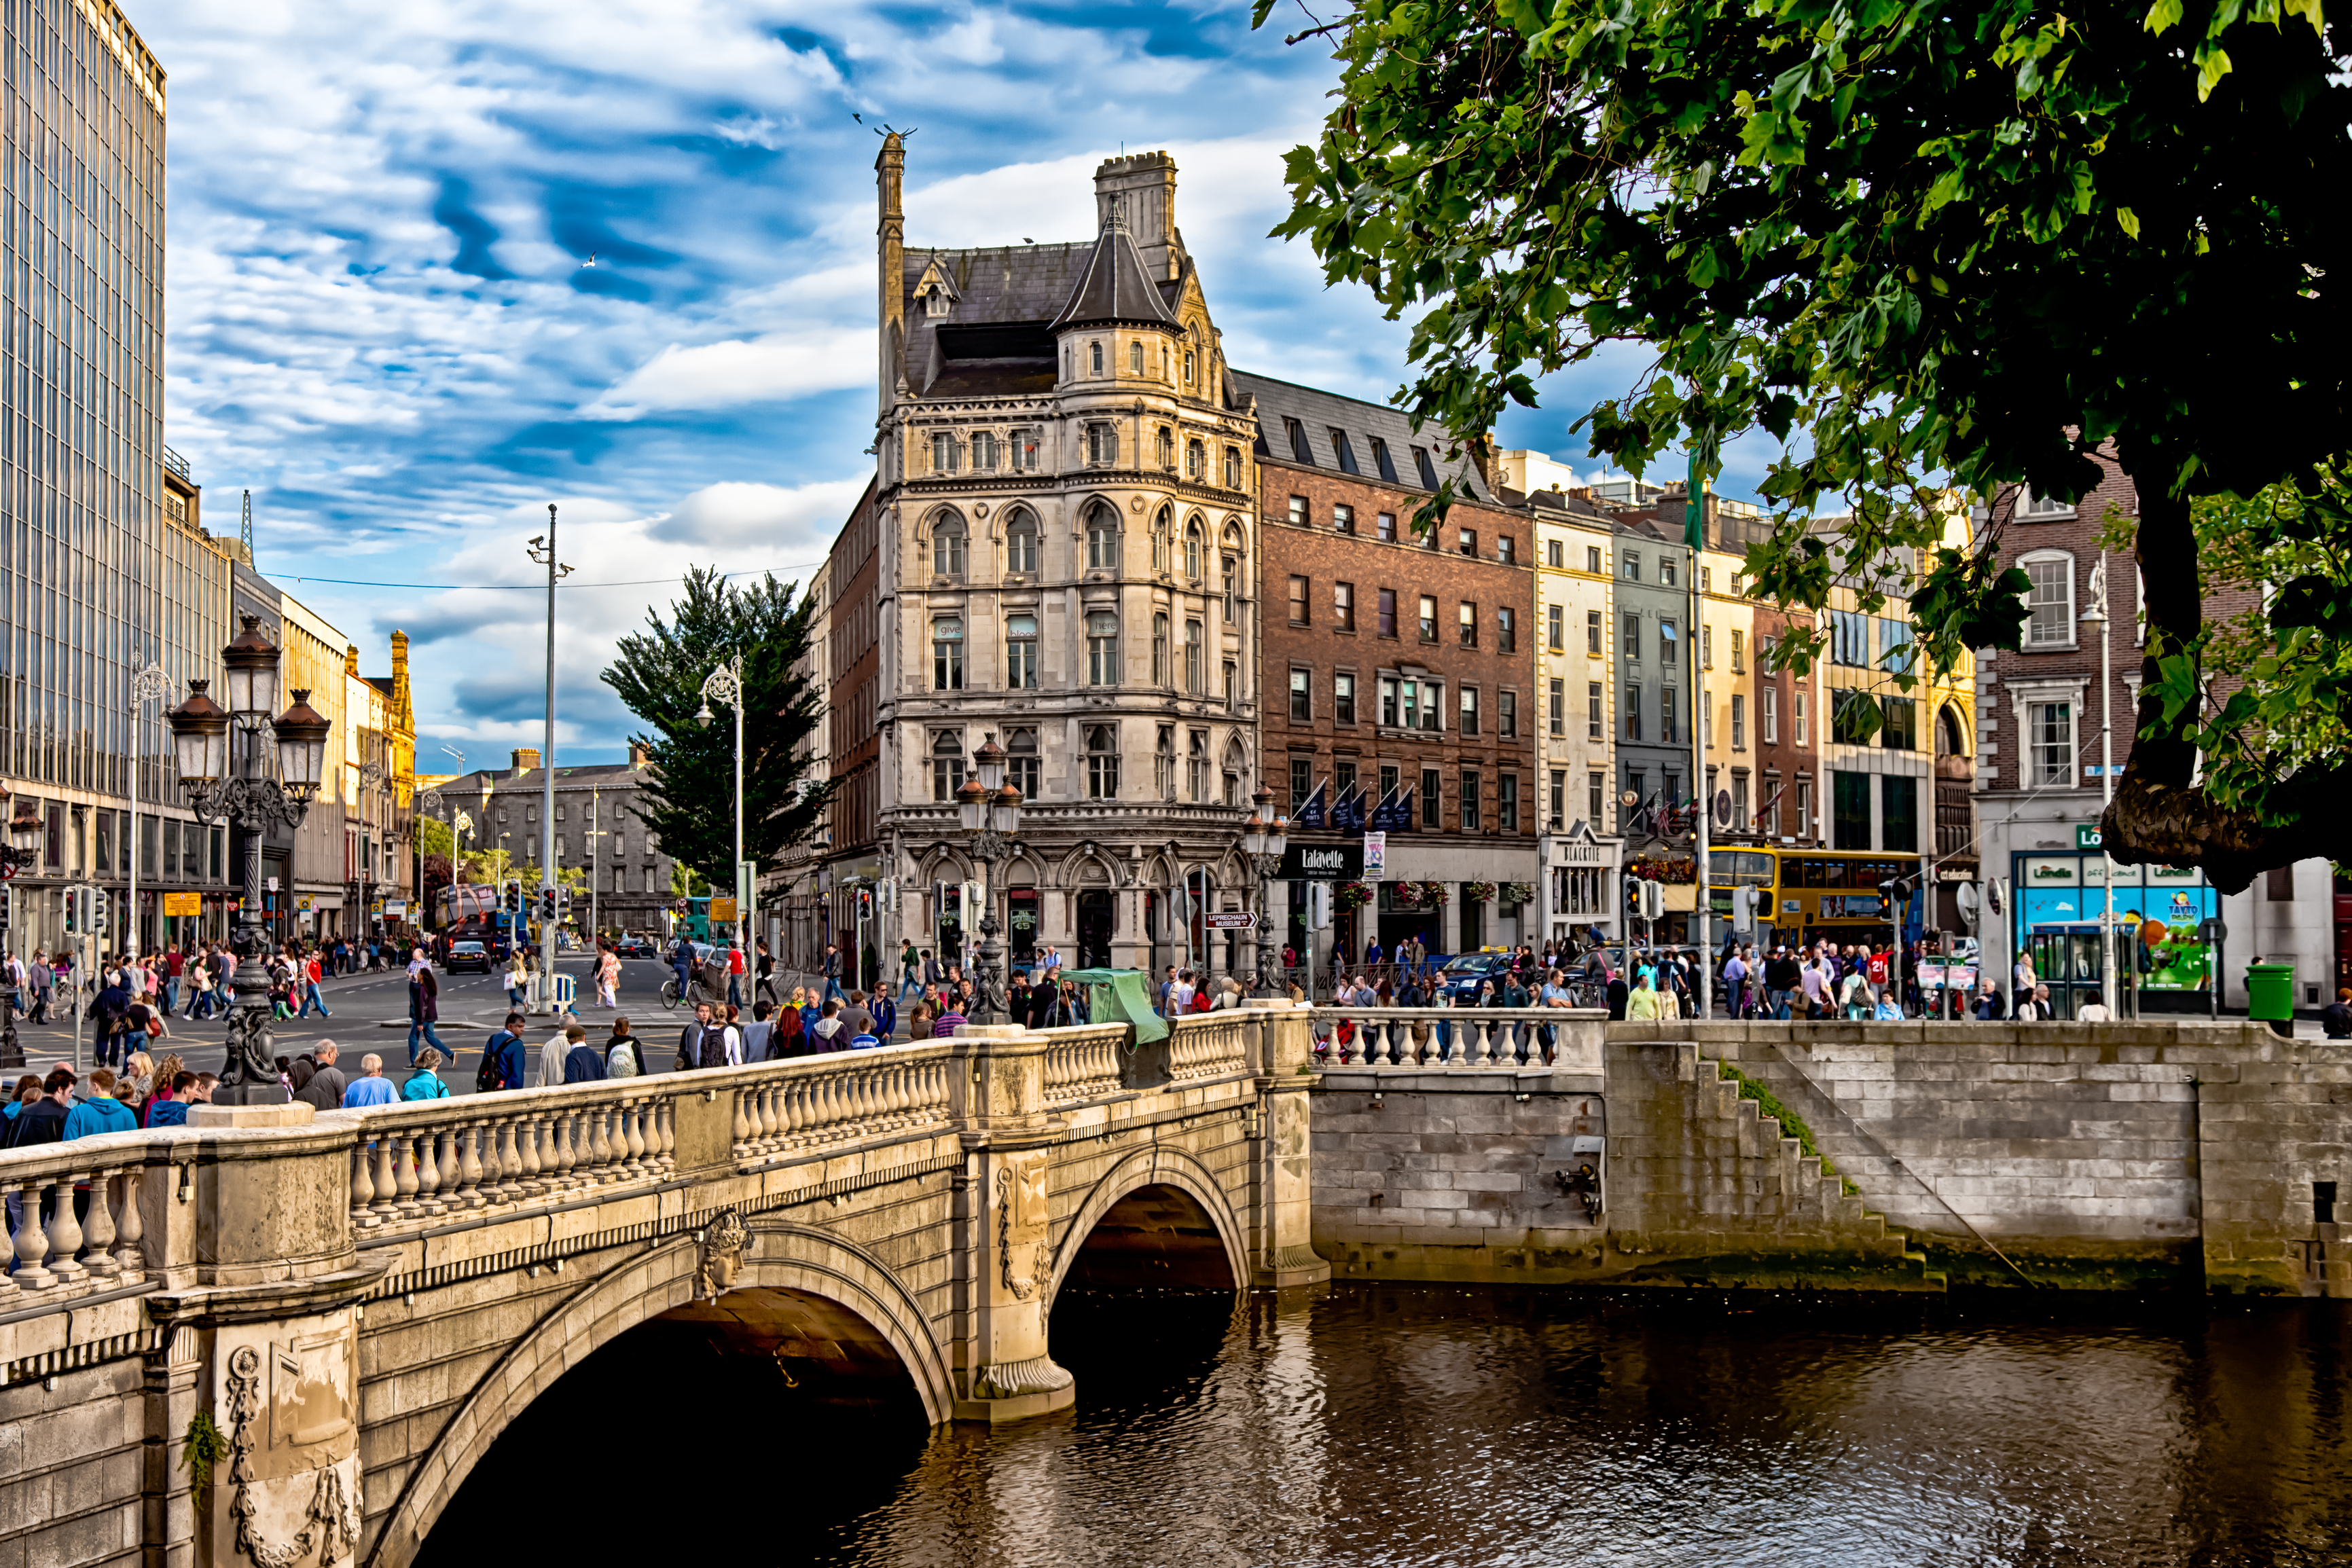 Delta flights to Dublin from the $400s round-trip!